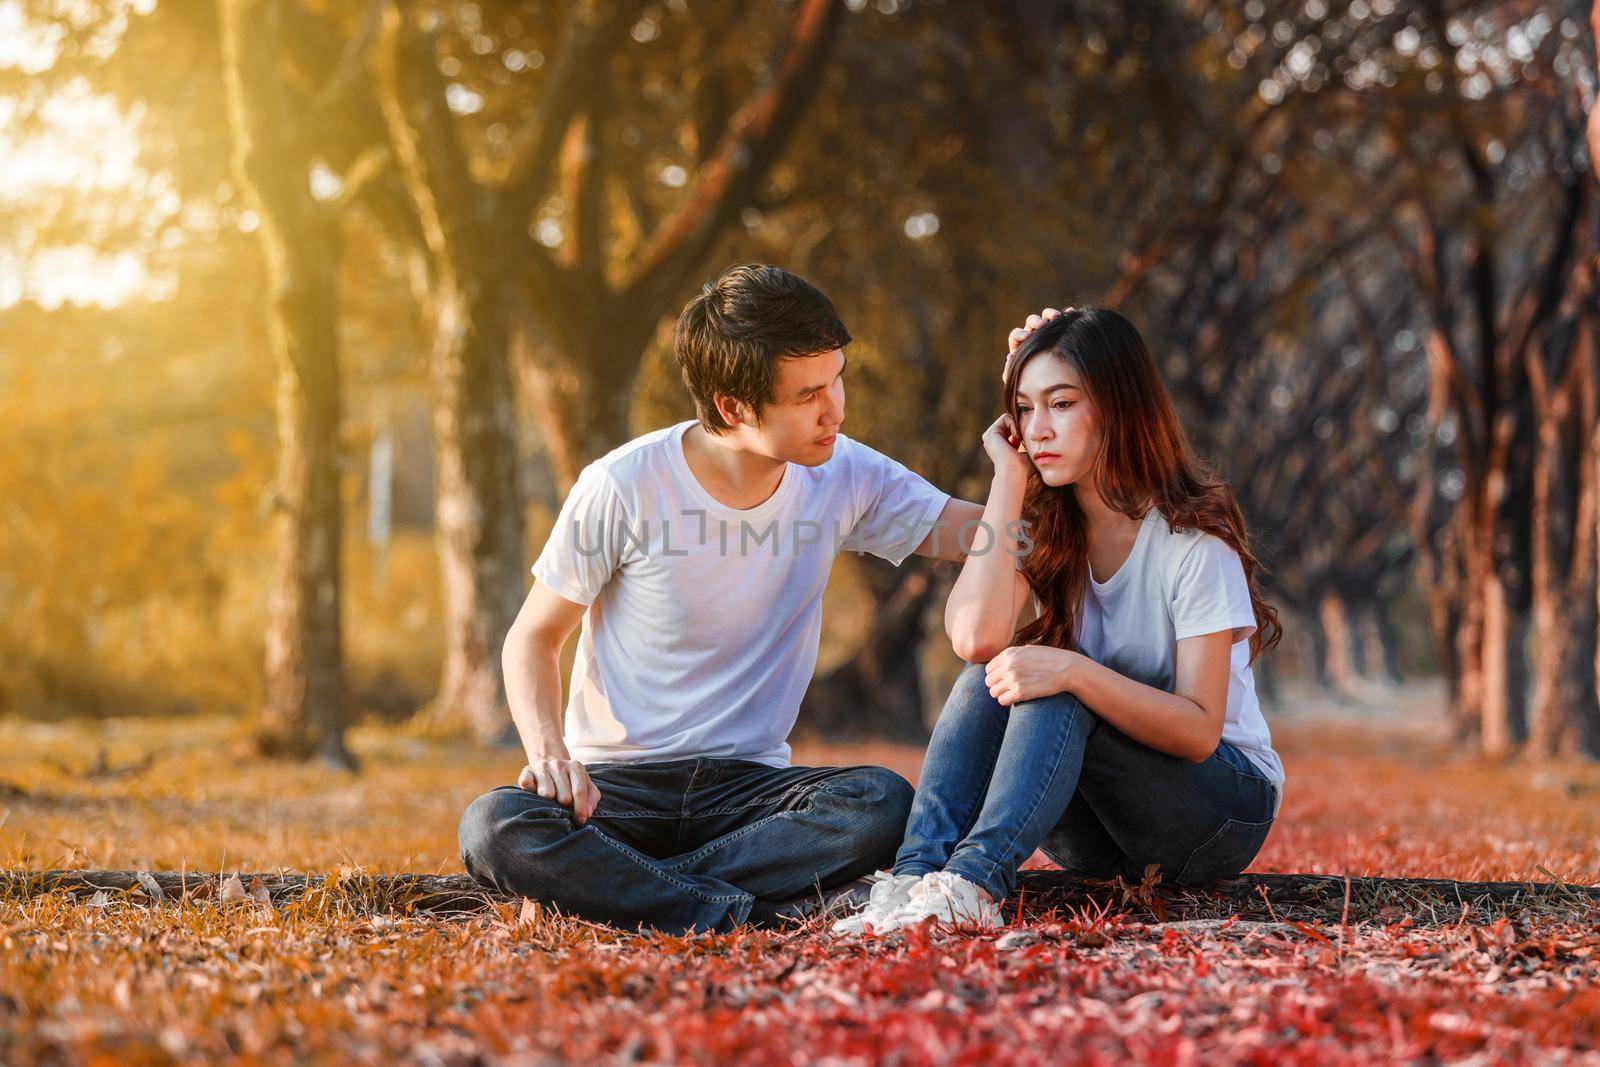 unhappy woman sitting with a concerned guy comforting her in park by geargodz